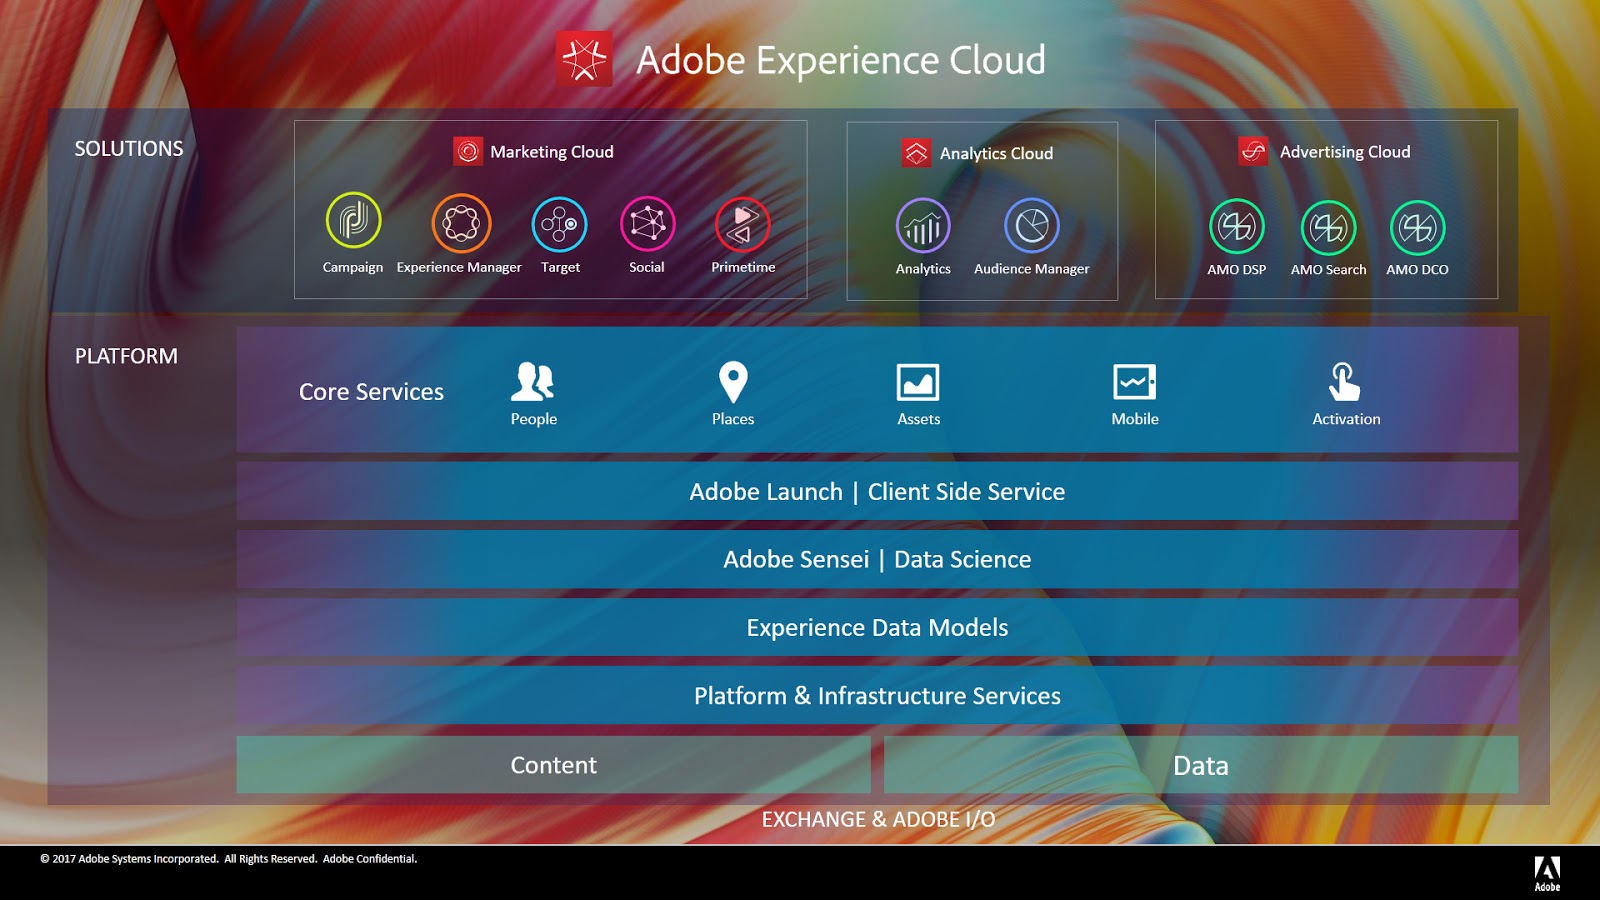 Launch client. Adobe experience cloud. Adobe experience Manager. Adobe и Microsoft. Adobe experience Manager когда появился.